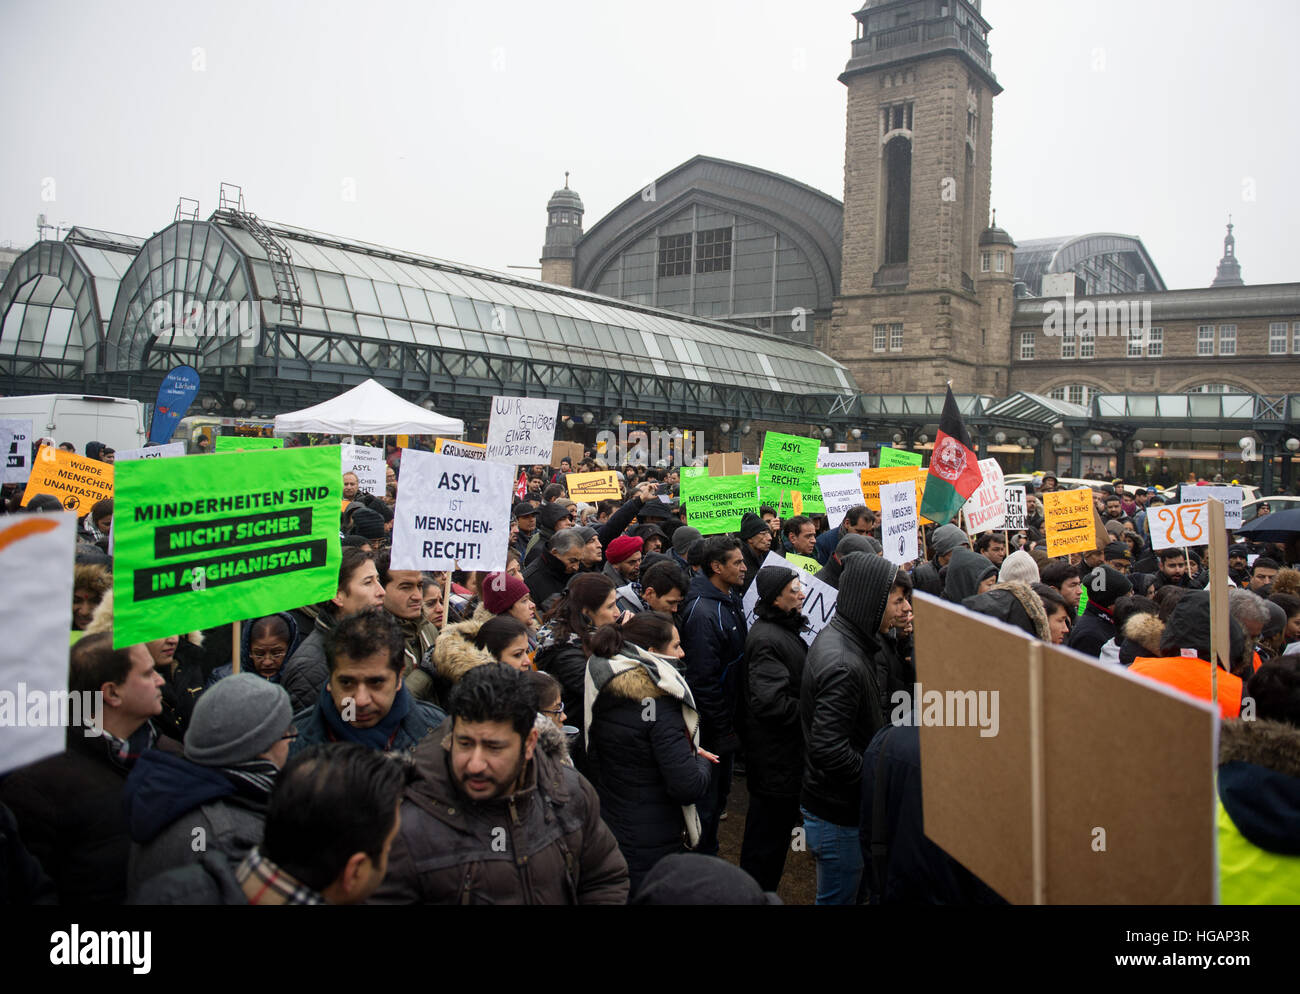 Hamburg, Germany. 7th Jan, 2017. Demonstrators holding banners that read 'Minderheiten sind nicht sicher in Afghanistan' (lit. minorities are not safe in Afghanistan) and 'Asyl ist Menschenrecht!' (lit. Asylum is a human right) during a demonstration against deportations to Afghanistan, in Hamburg, Germany, 7 January 2017. The Afghan Hindu community and the Hindu temple called the demonstration. Photo: Daniel Reinhardt/dpa/Alamy Live News Stock Photo